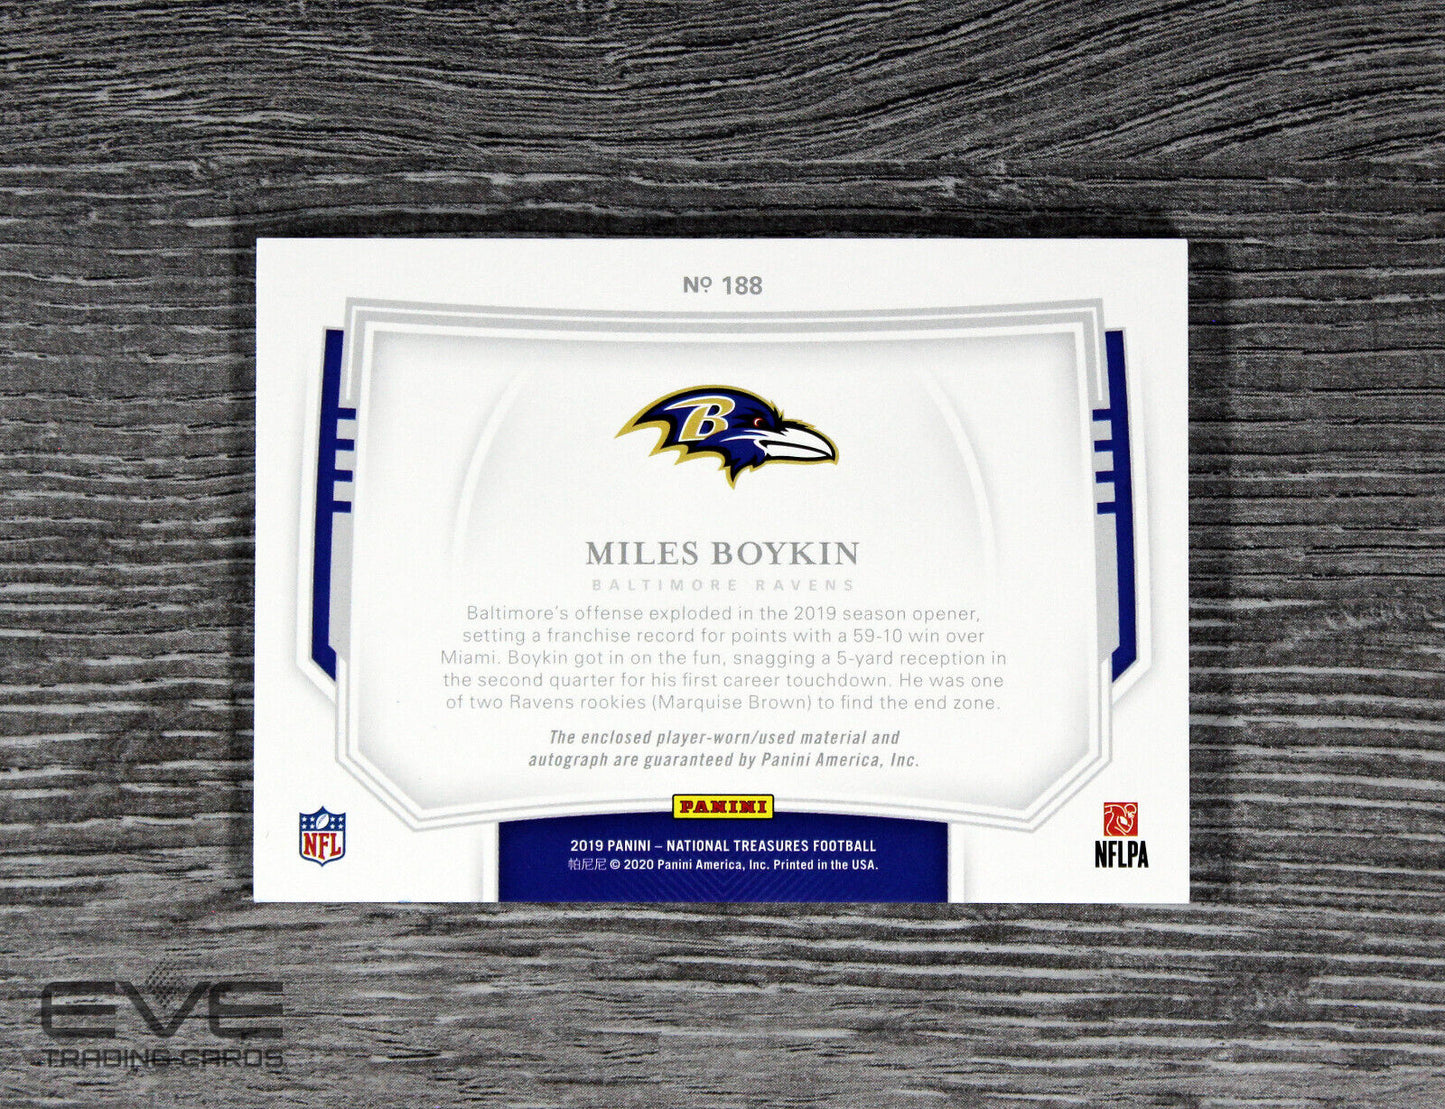 2019 Panini National Treasures NFL Card #188 Miles Boykin Patch Auto /80 NM/M